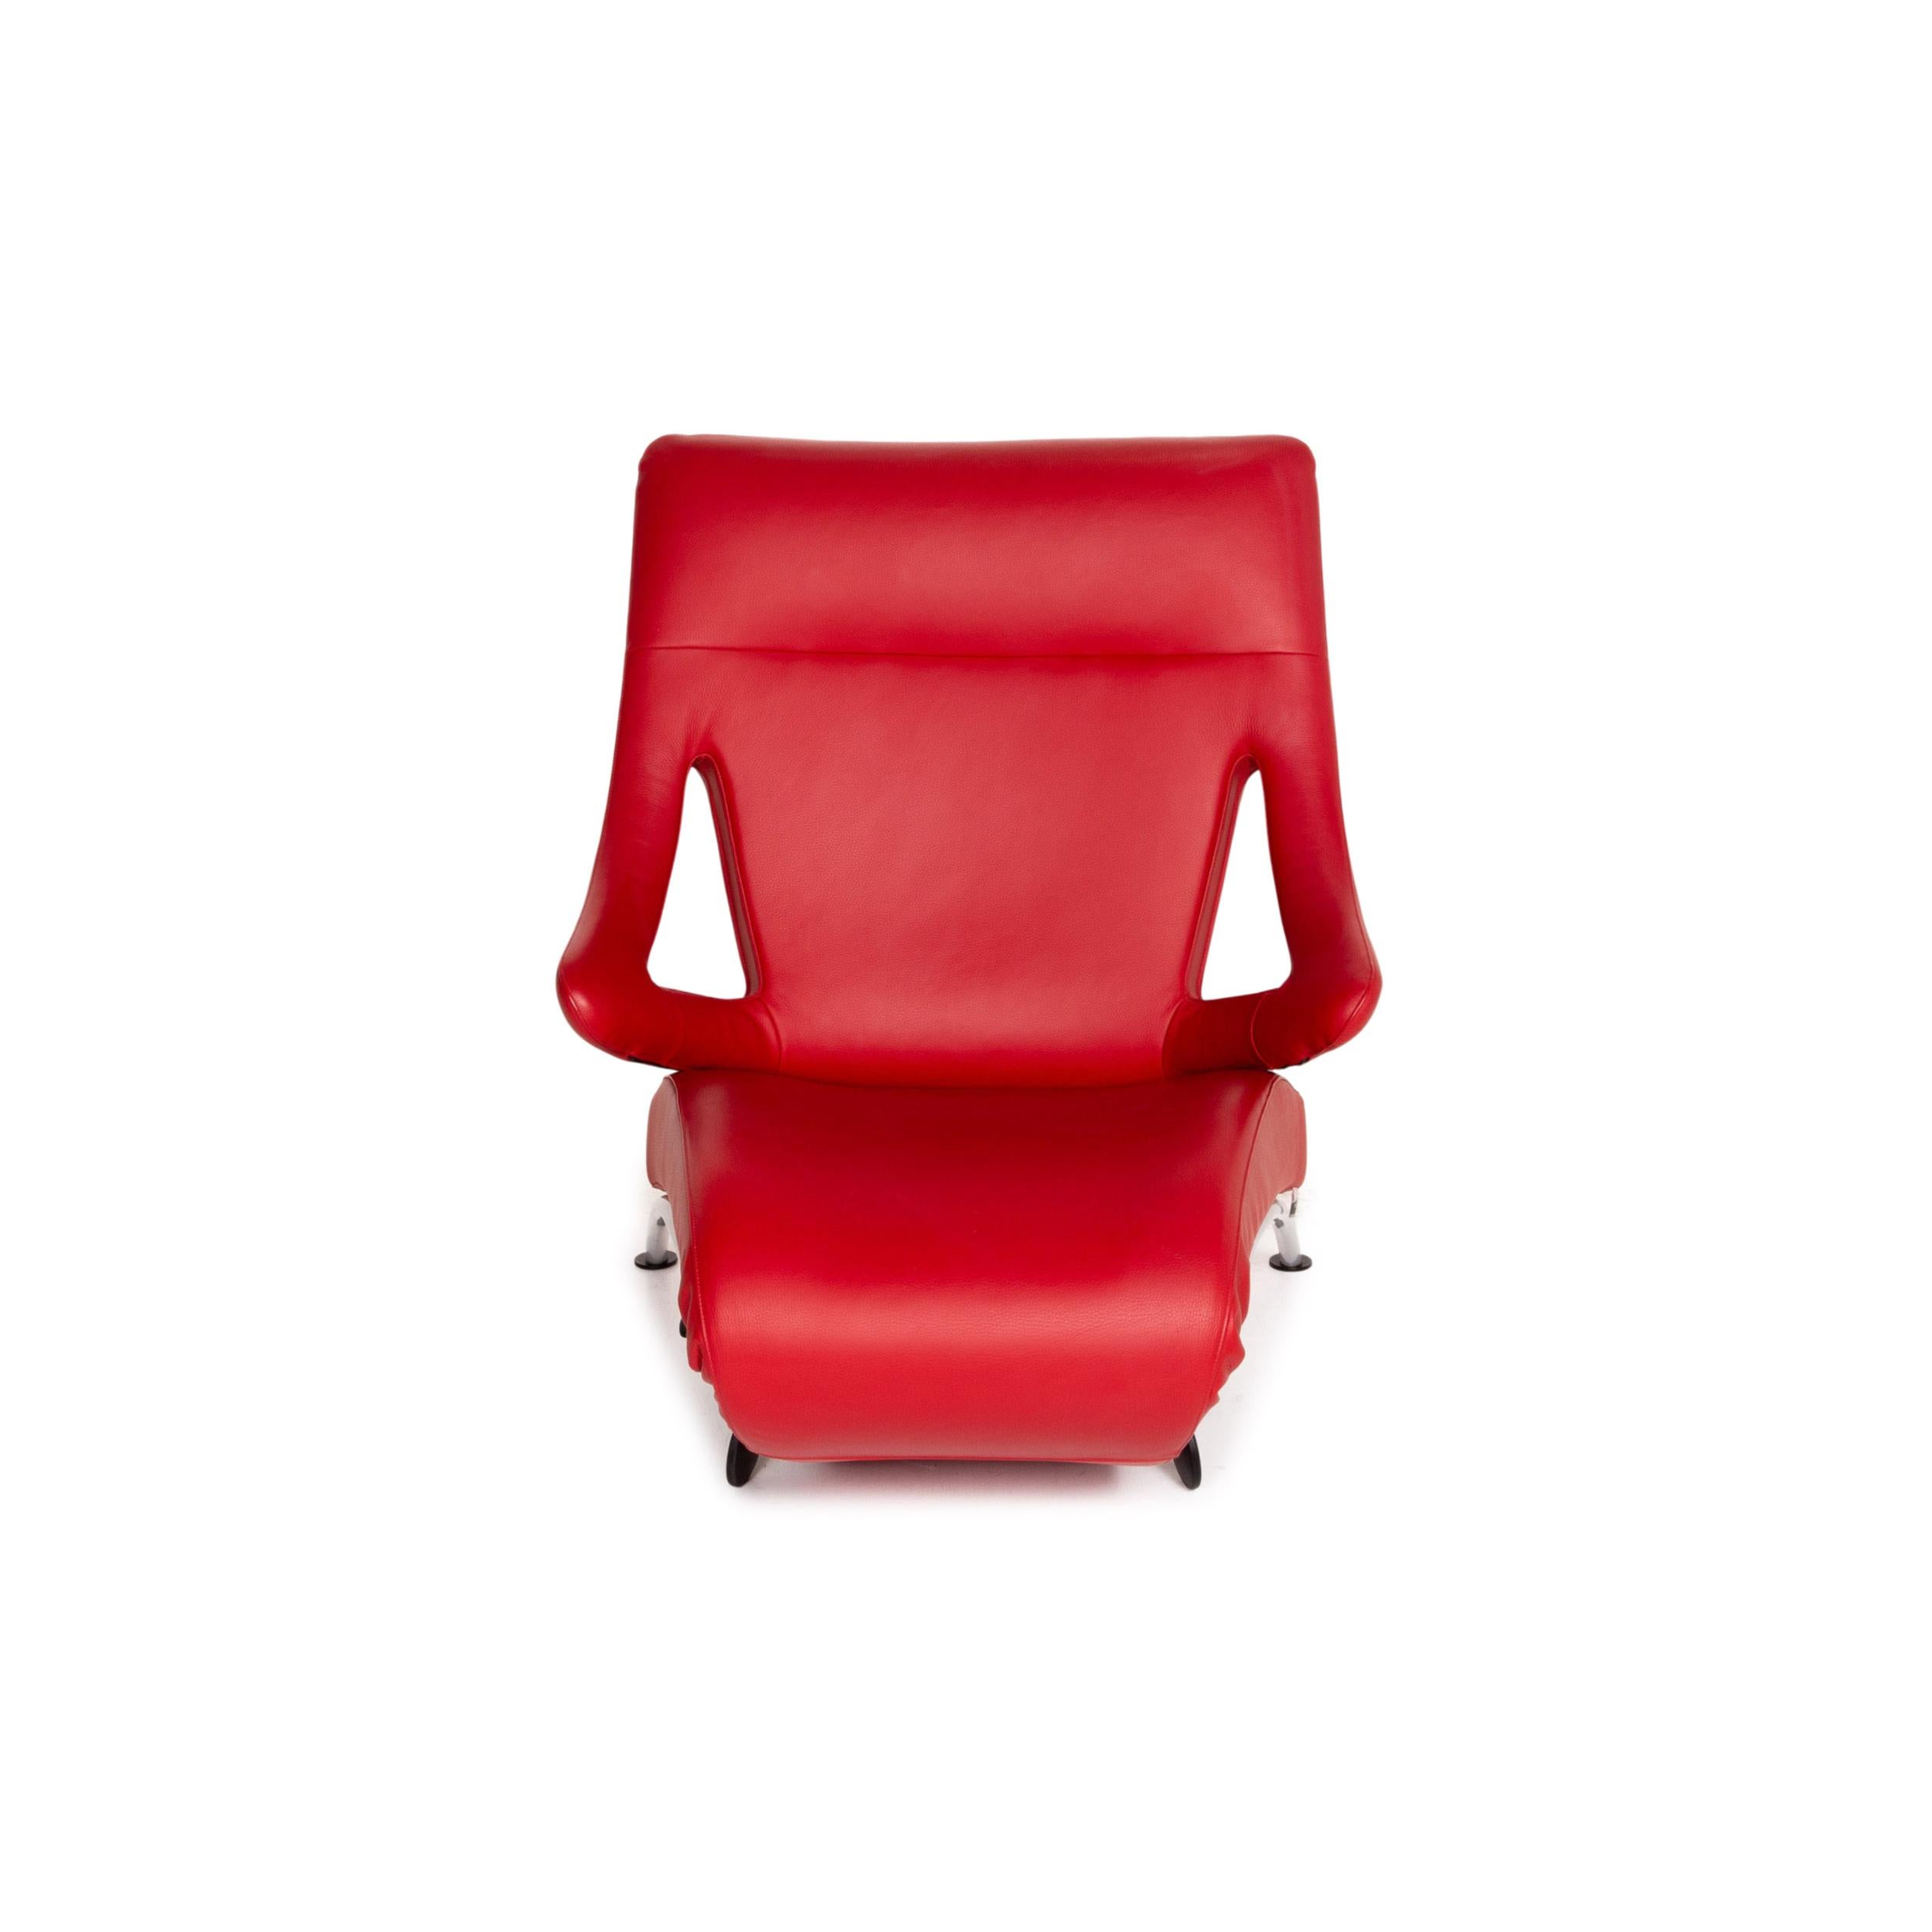 WK Wohnen Solo 699 Leather Armchair Red Lounger Relaxation Function 4